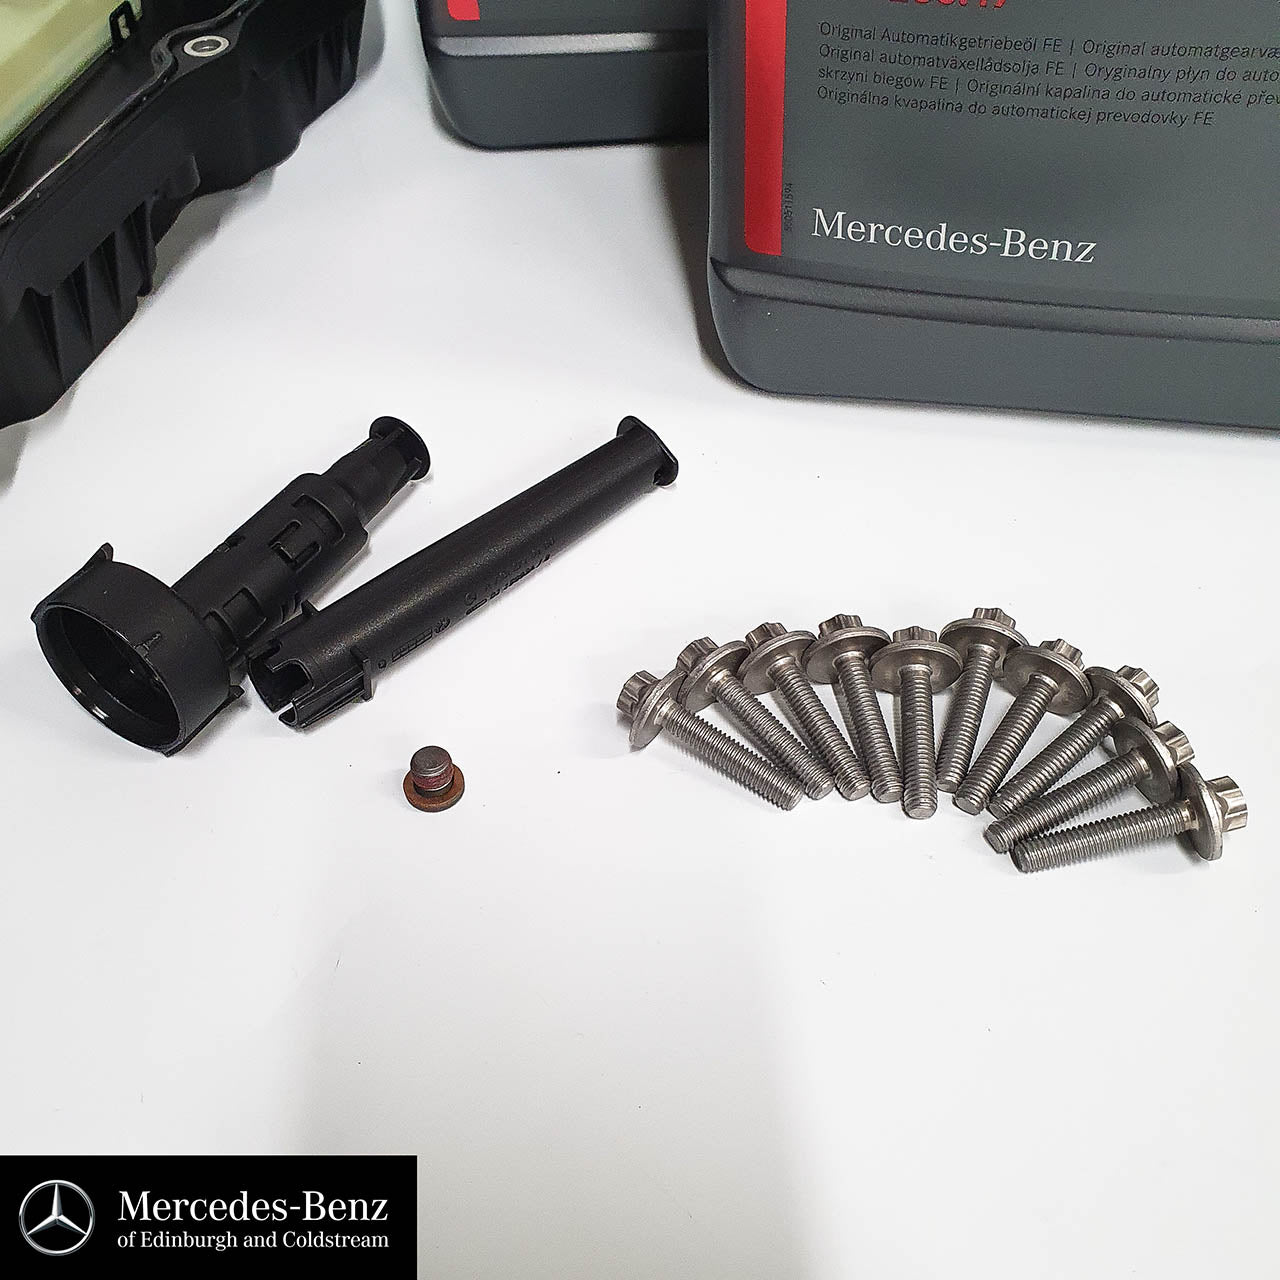 Genuine Mercedes-Benz 725.0 Automatic gearbox service kit